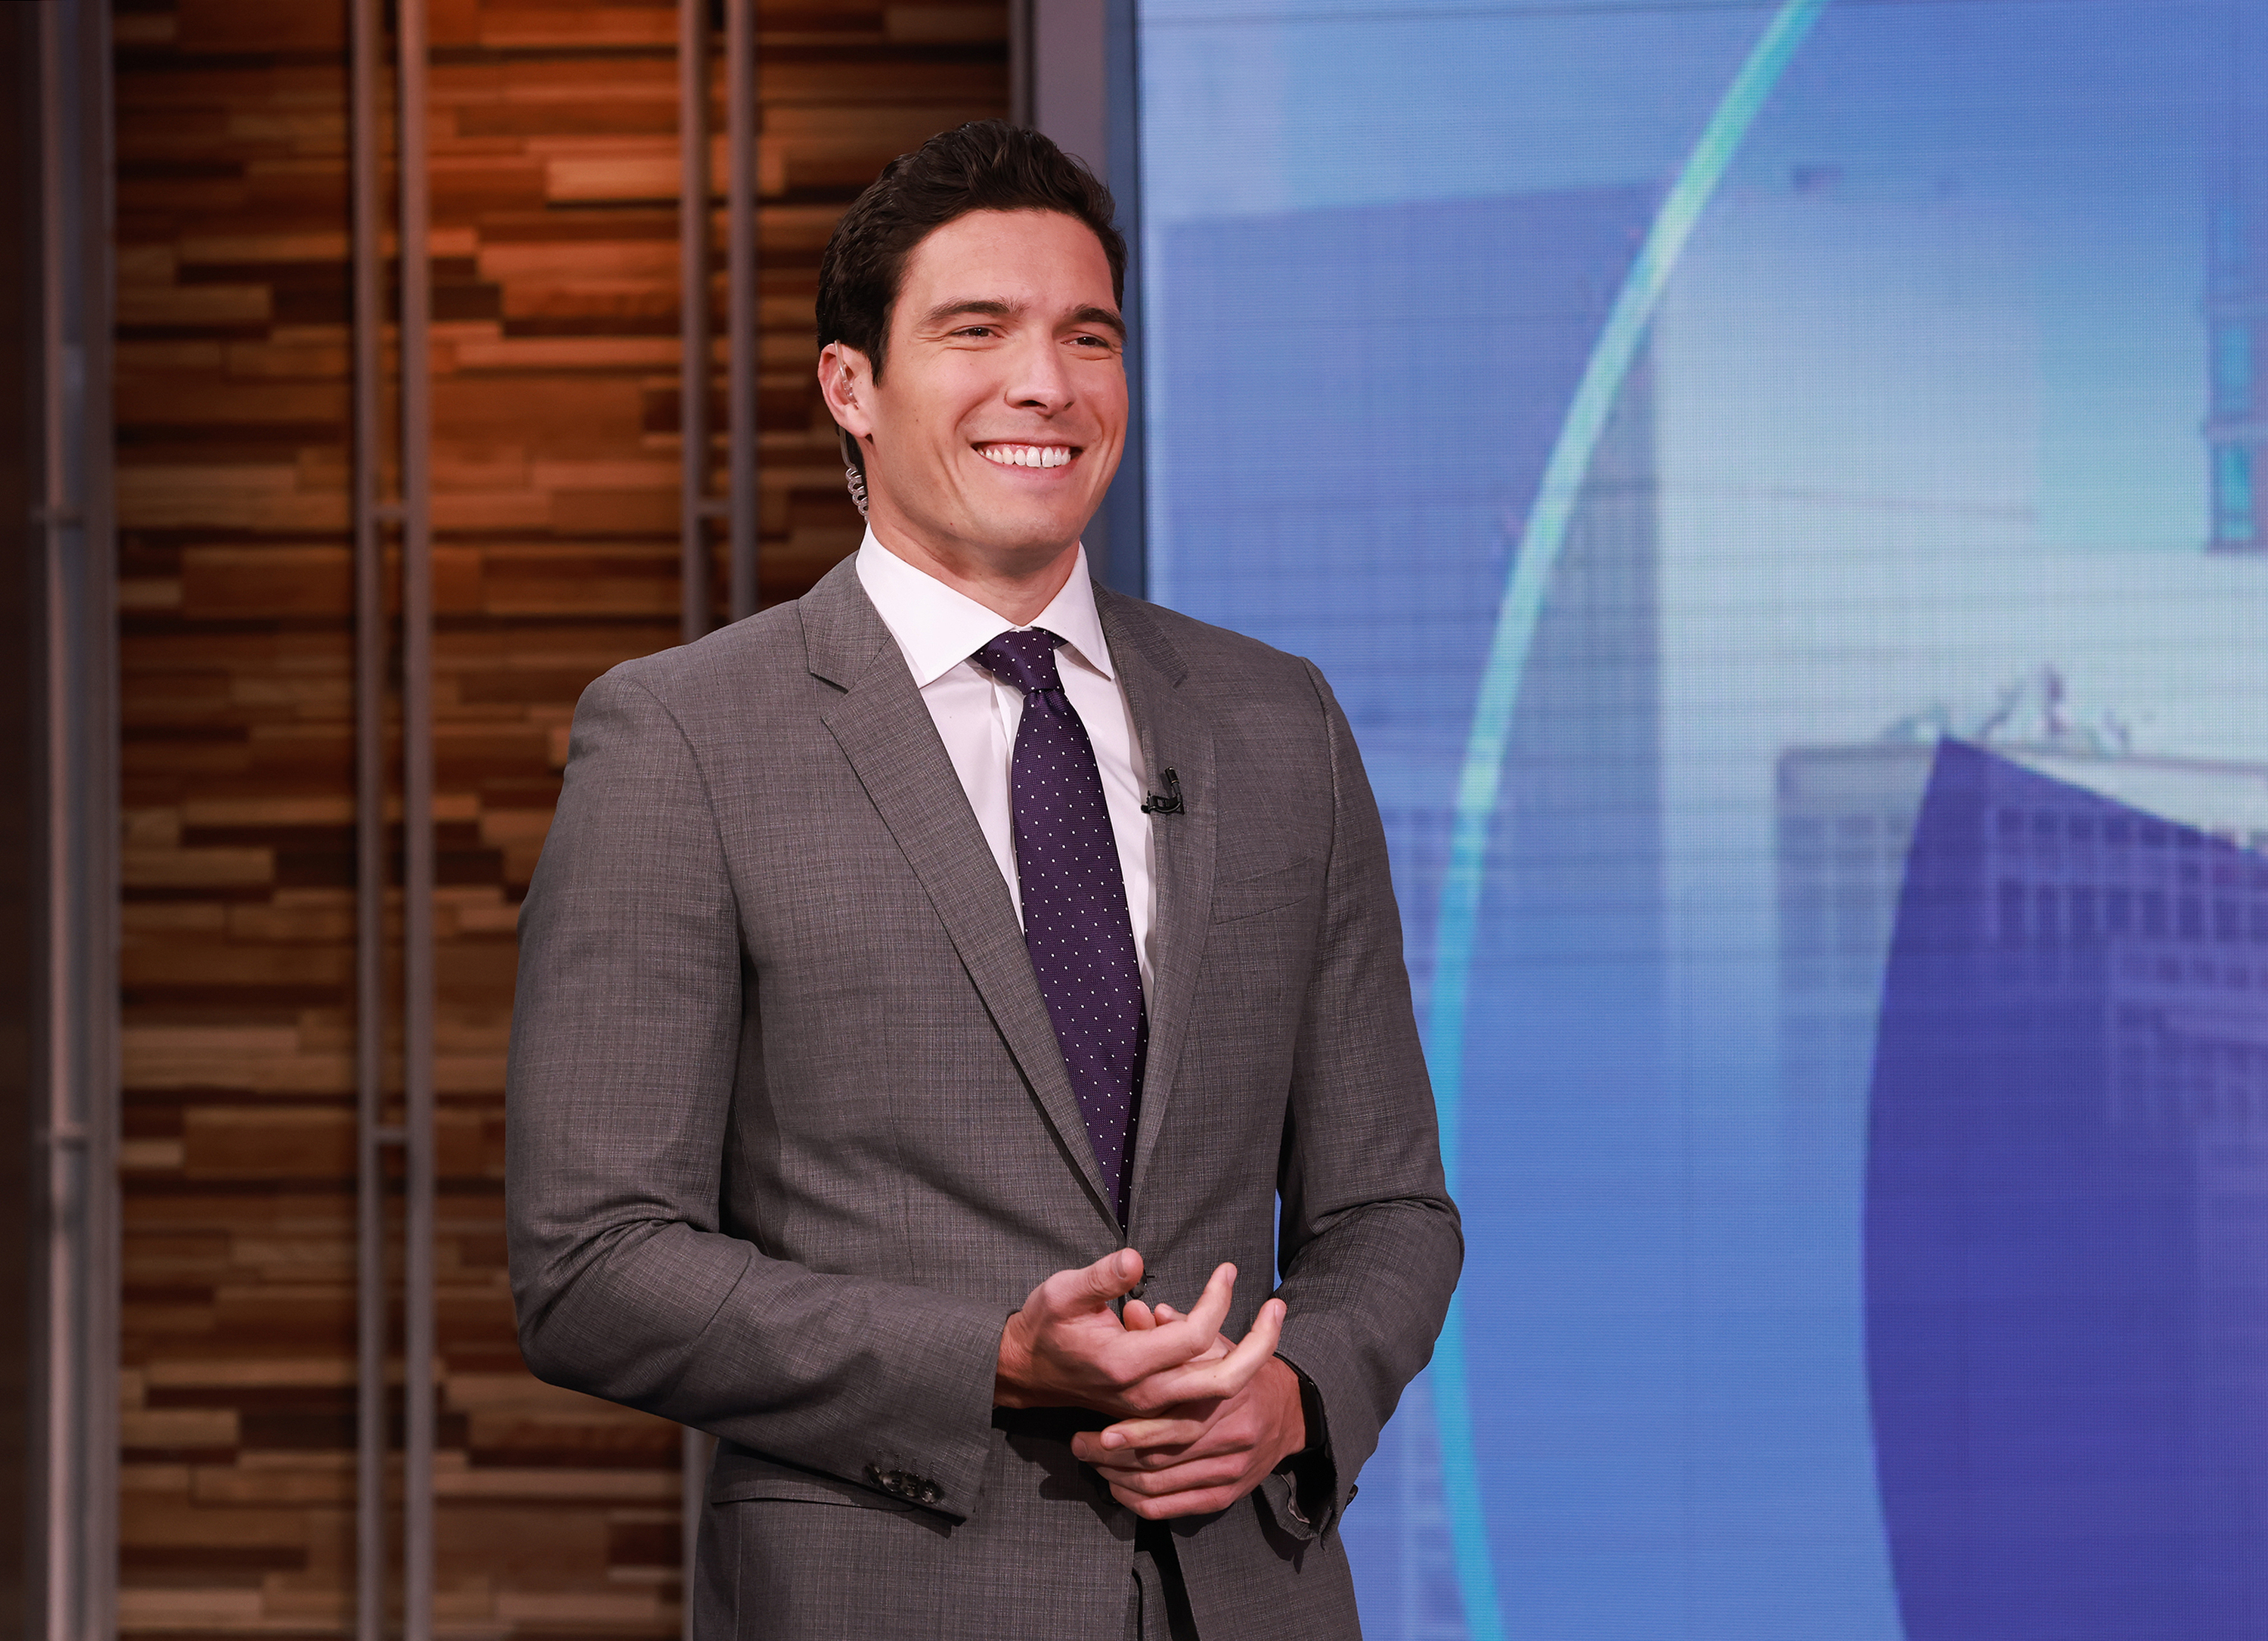 Will Reeve dans l'émission Good Morning America le mardi 21 mars 2023 sur ABC | Source : Getty Images